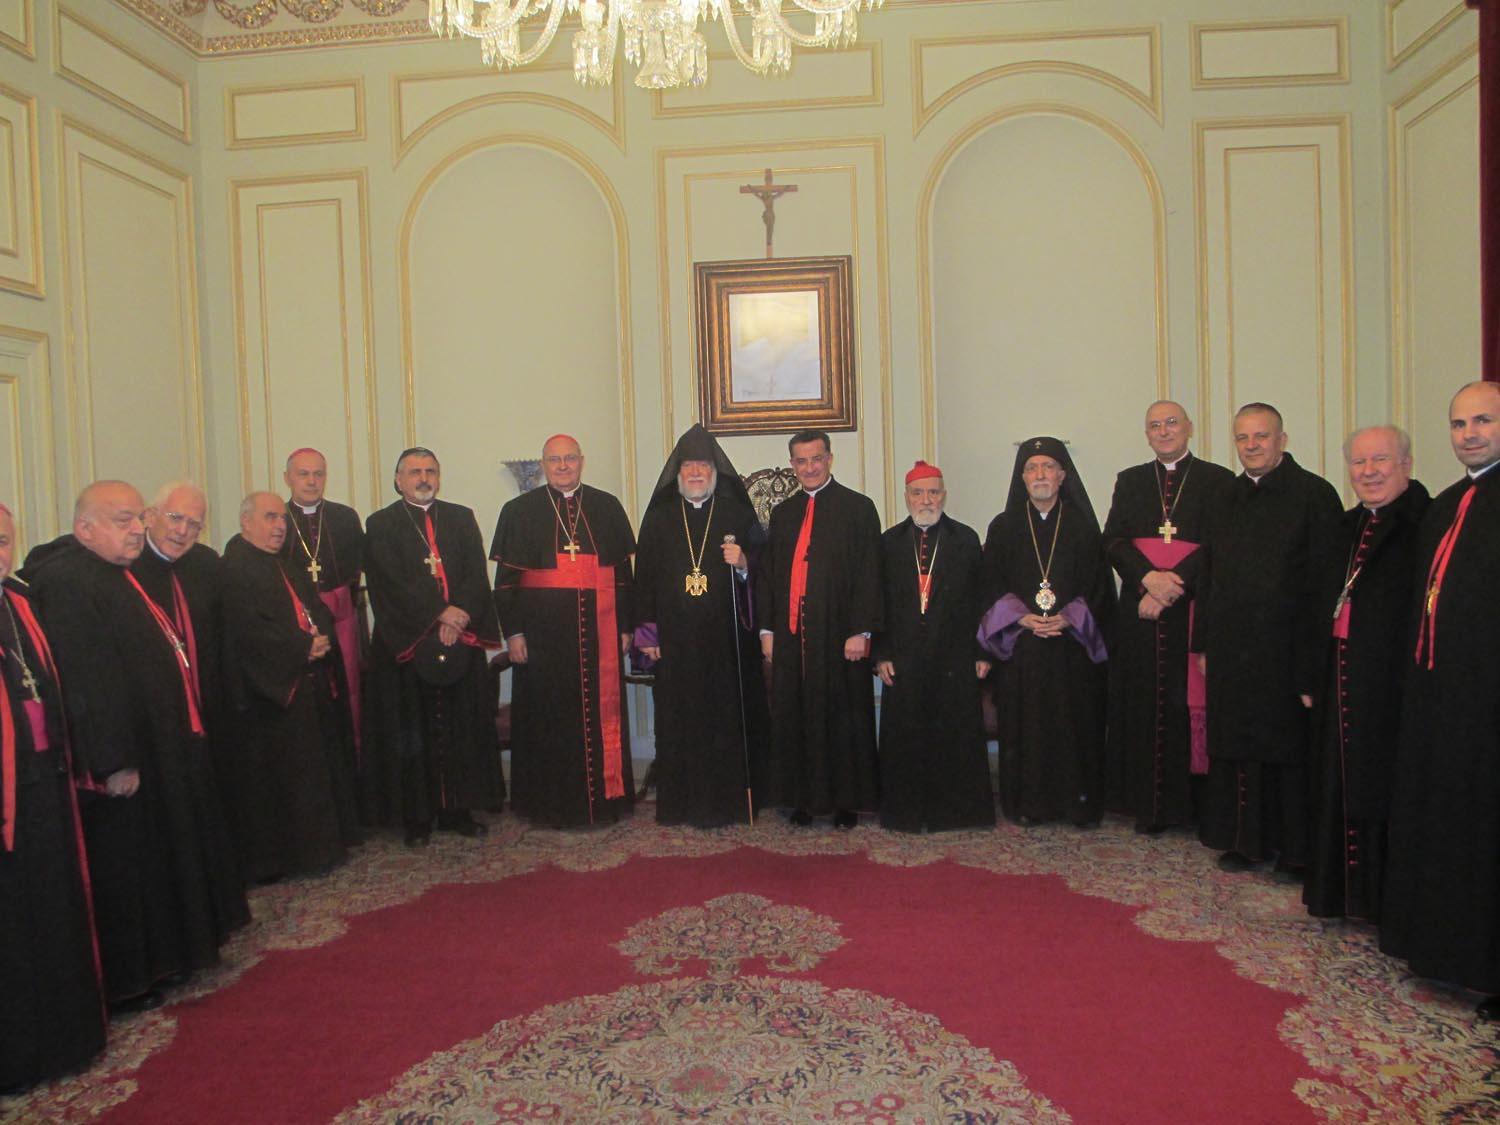 Officials visiting His Holiness Aram I on Armenian Christmas discuss the situation in Lebanon and the Middle Eas